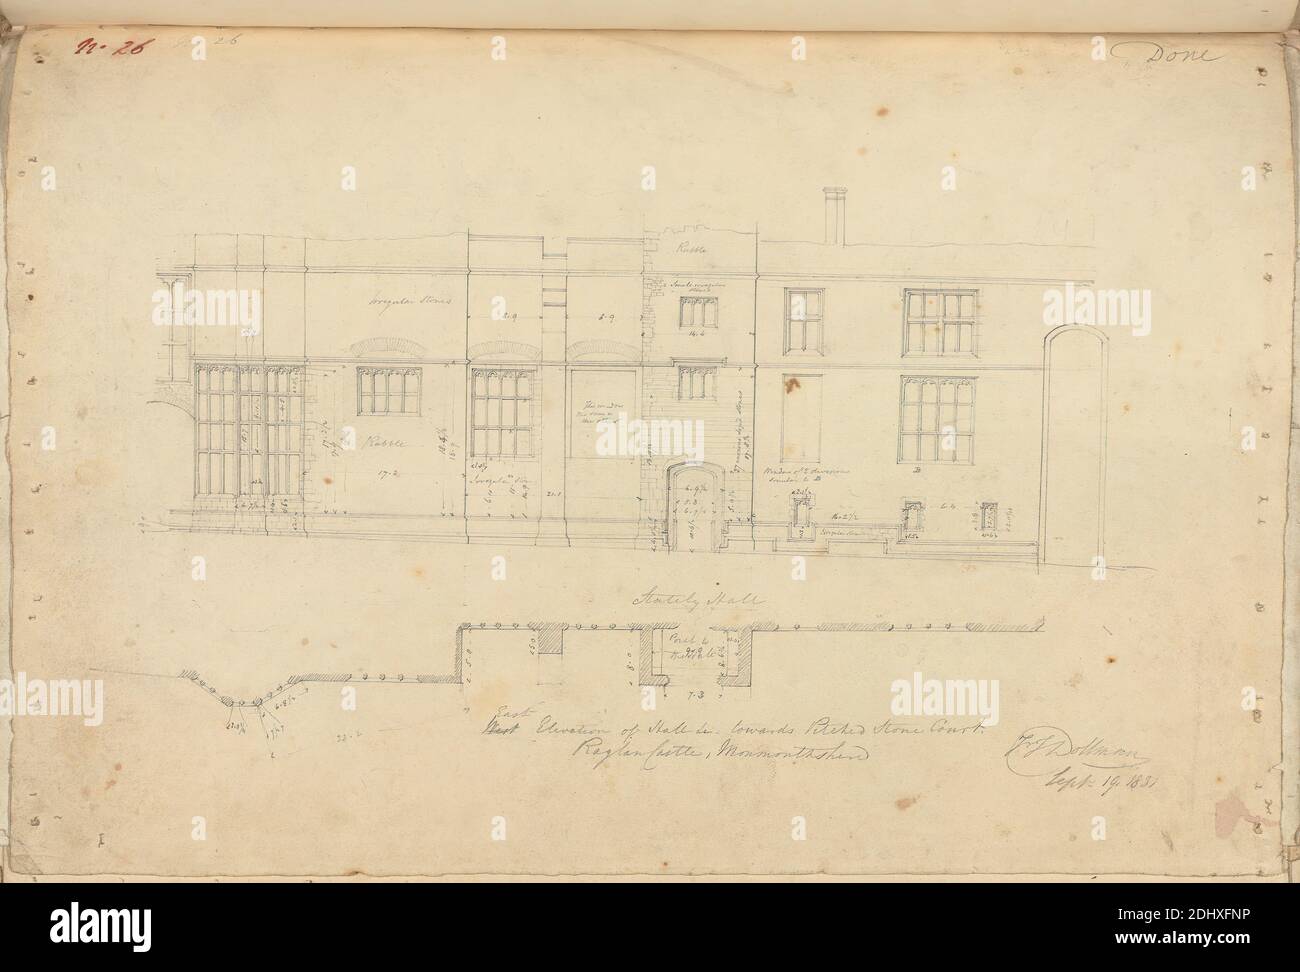 Raglan Castle, Monmouthshire, Wales: East Elevation of Hall, unknown artist, (FT Dollman), Studio of Augustus Charles Pugin, 1762–1832, French, formerly Augustus Welby Northmore Pugin, 1812–1852, British, 1831, Graphite on moderately thick, smooth, cream wove paper, Sheet: 10 3/8 x 14 15/16 inches (26.4 x 37.9 cm), architectural subject, castle, elevations (drawings), Gothic (Medieval), halls, plans (drawings), Monmouthshire, Raglan Castle Stock Photo